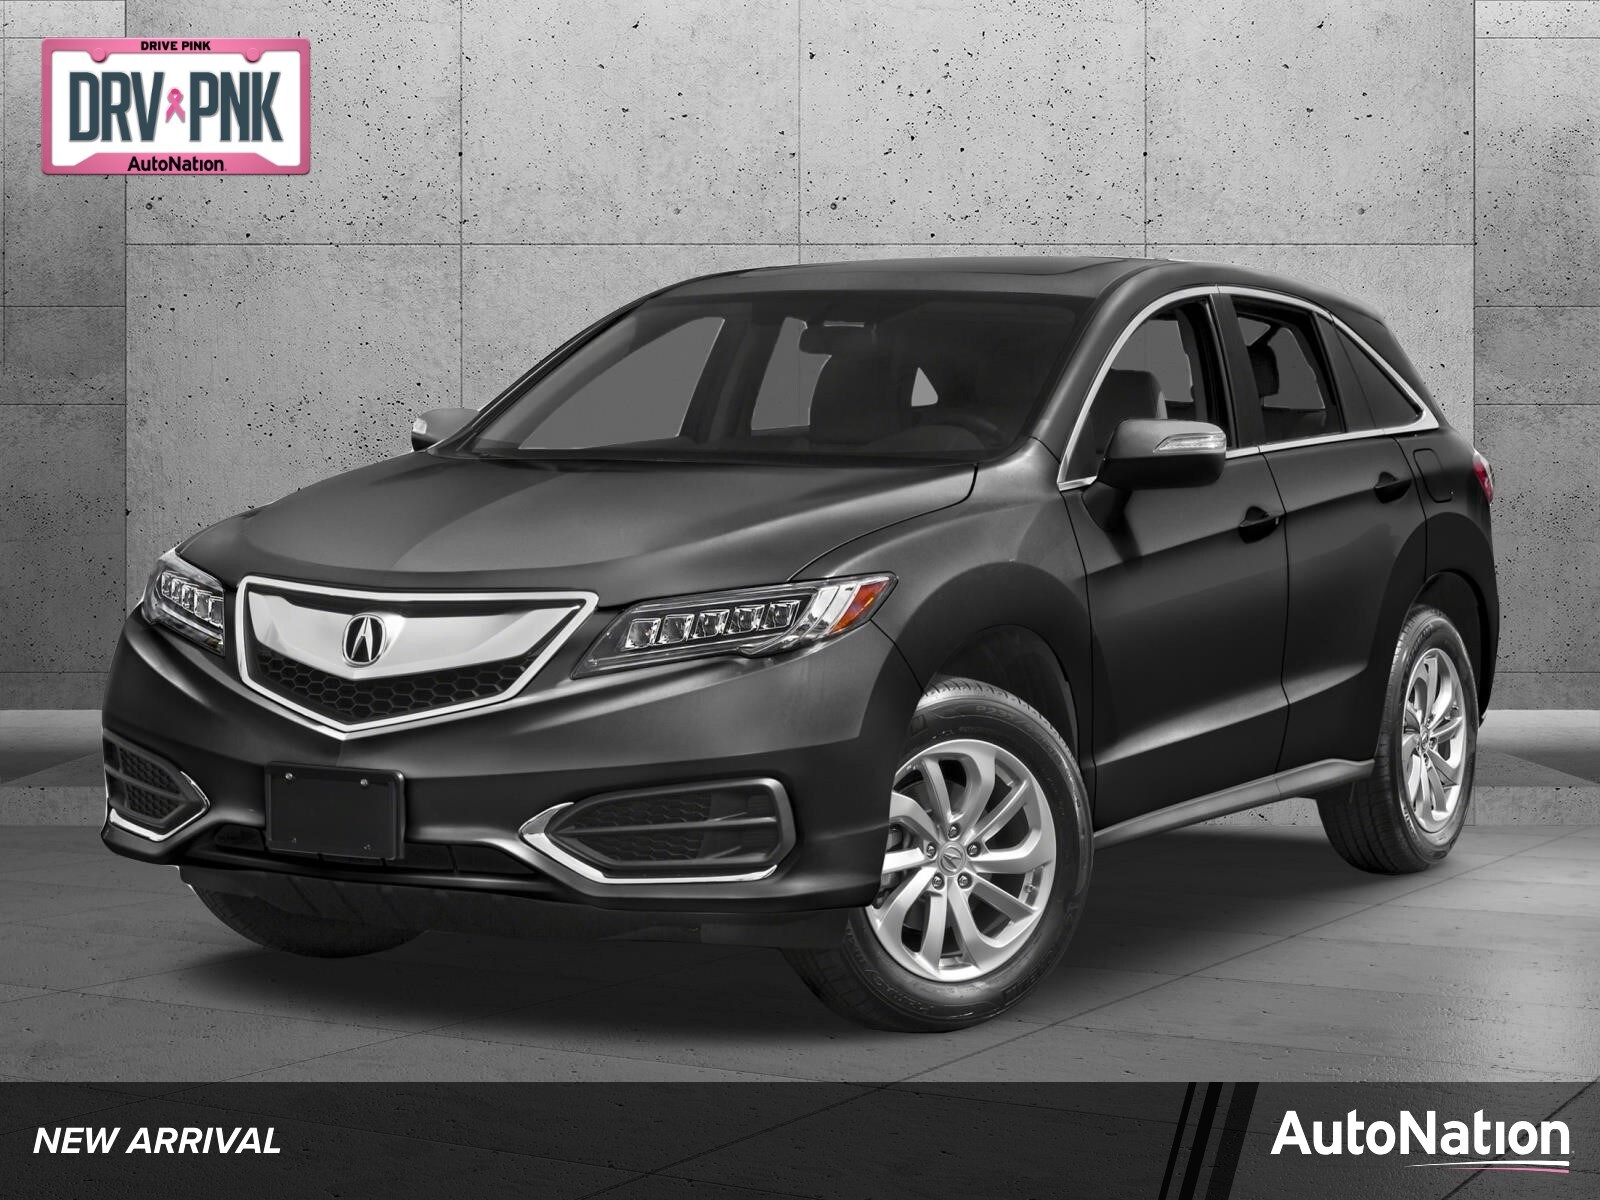 43+ Acura Rdx 2013 Customized Wallpaper How To free download